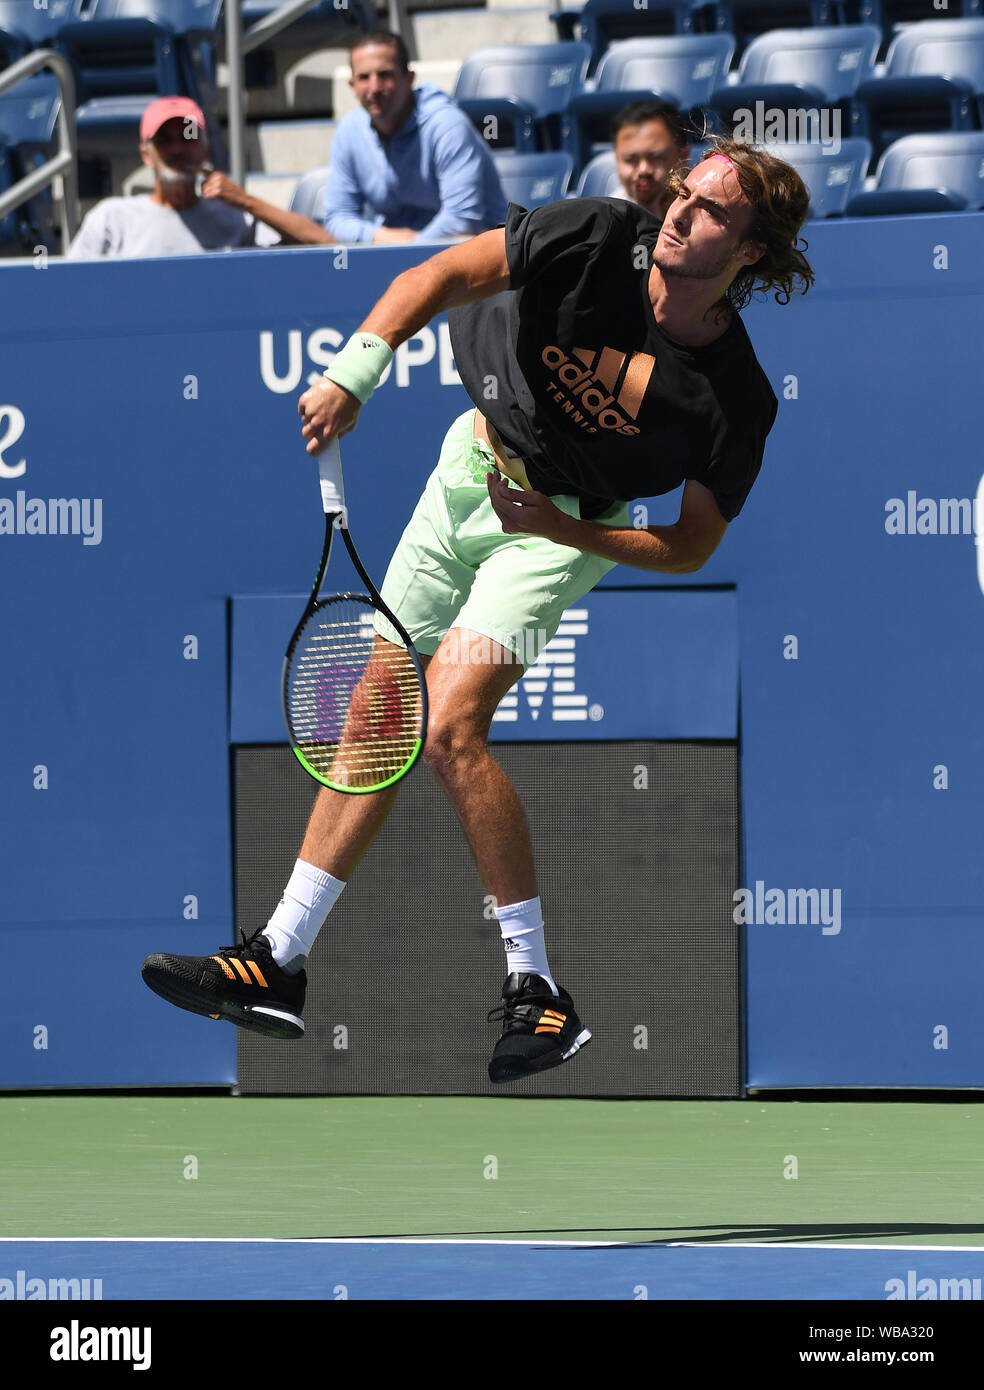 New York, USA. 25th Aug, 2019. Flushing Meadows New York US Open Tennis 25/08/2019 Stefanos Tsitsipas (GRE) practices today on Louis Armstrong Court Credit: Roger Parker/Alamy Live News Stock Photo